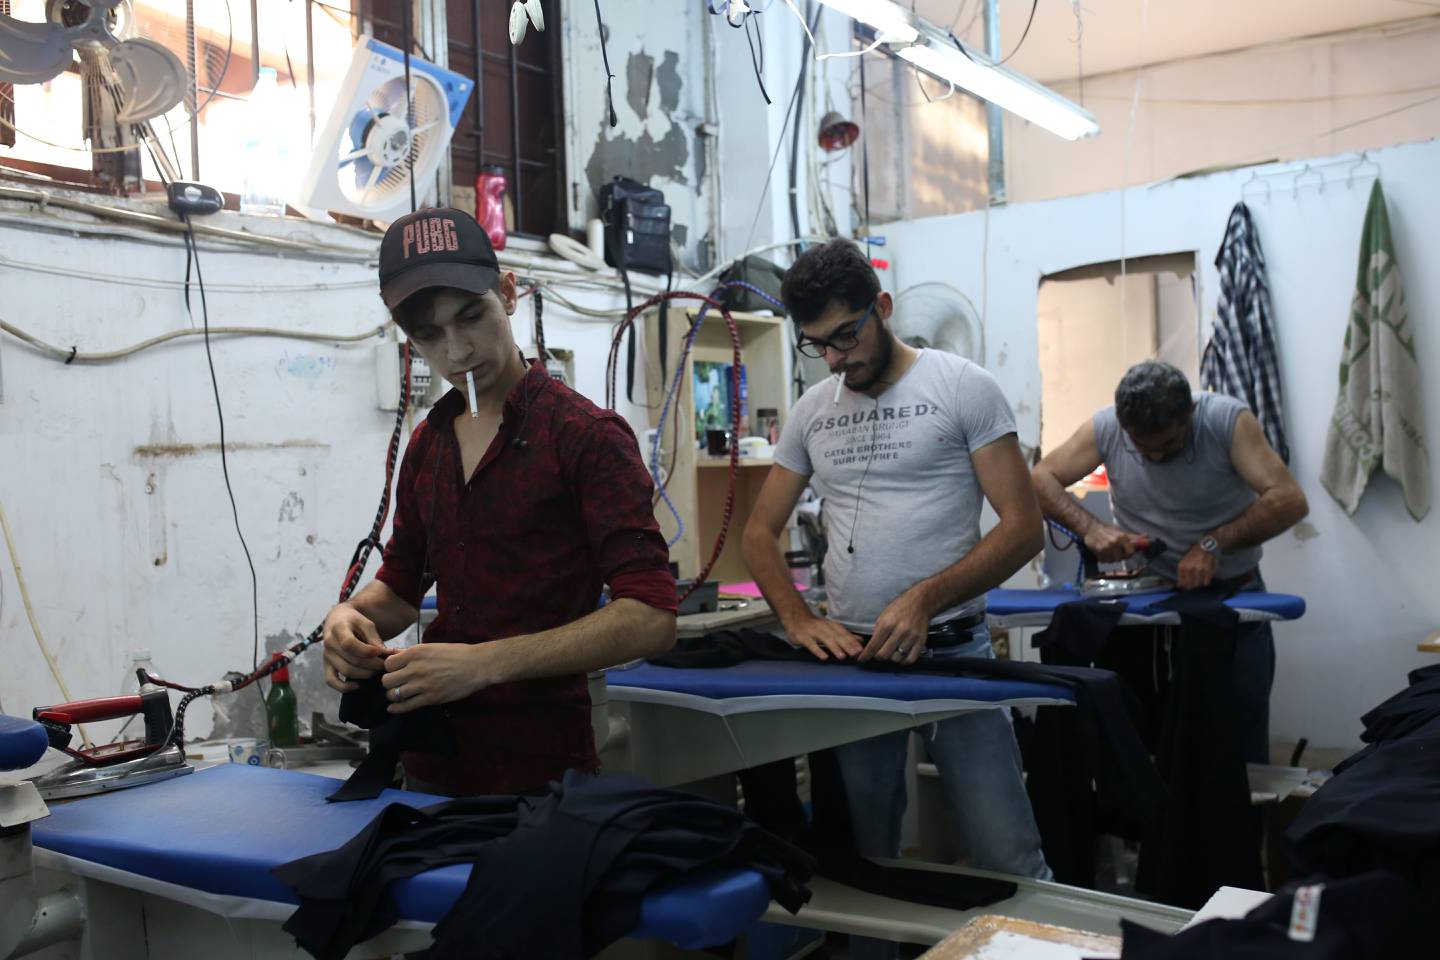 Syrian refugees working as day labourers at a textile workshop in Istanbul in 2019. They are finding jobs harder to find amid rising anti-refugee sentiment and an economic crisis in Turkey. Reuters